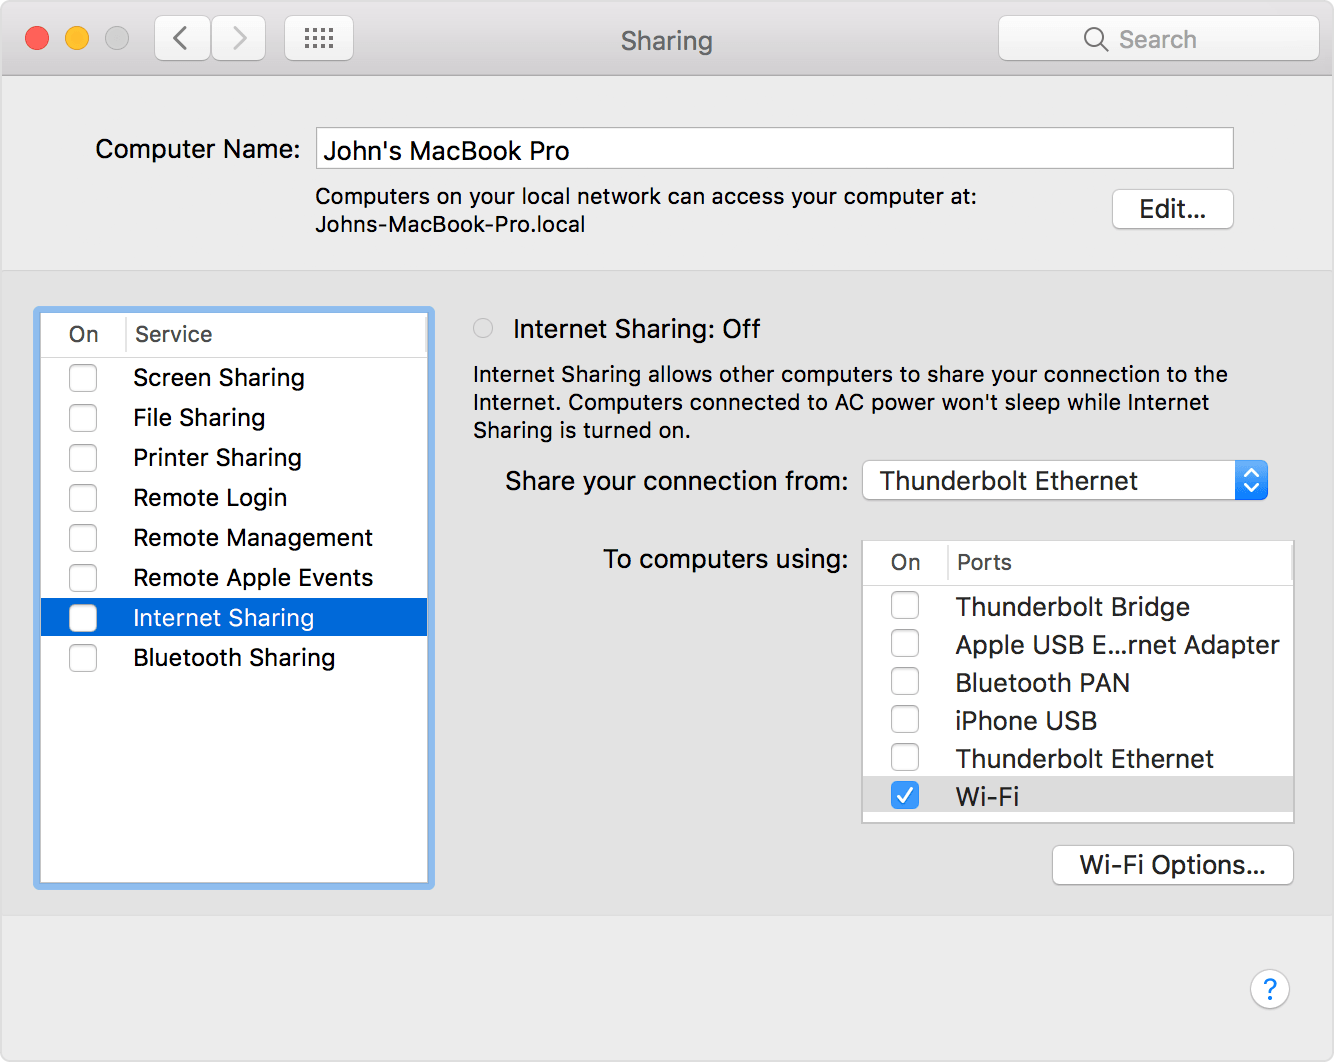 share the Wi-Fi connection from the Mac